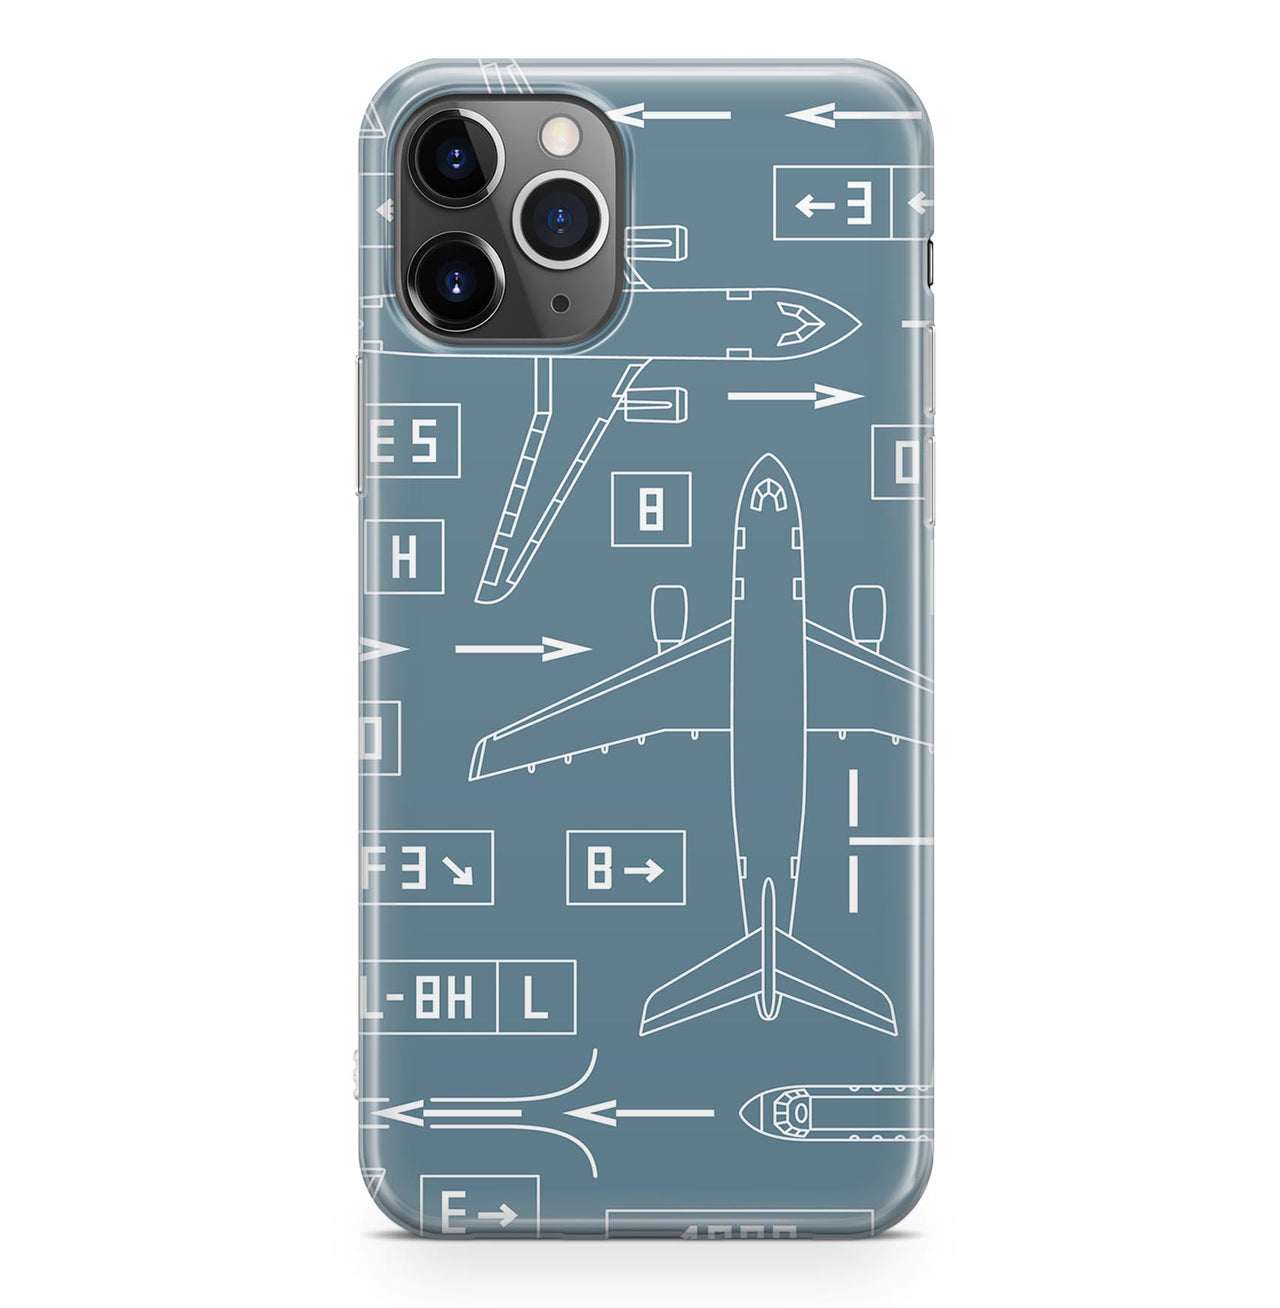 Jet Planes & Airport Signs Designed iPhone Cases